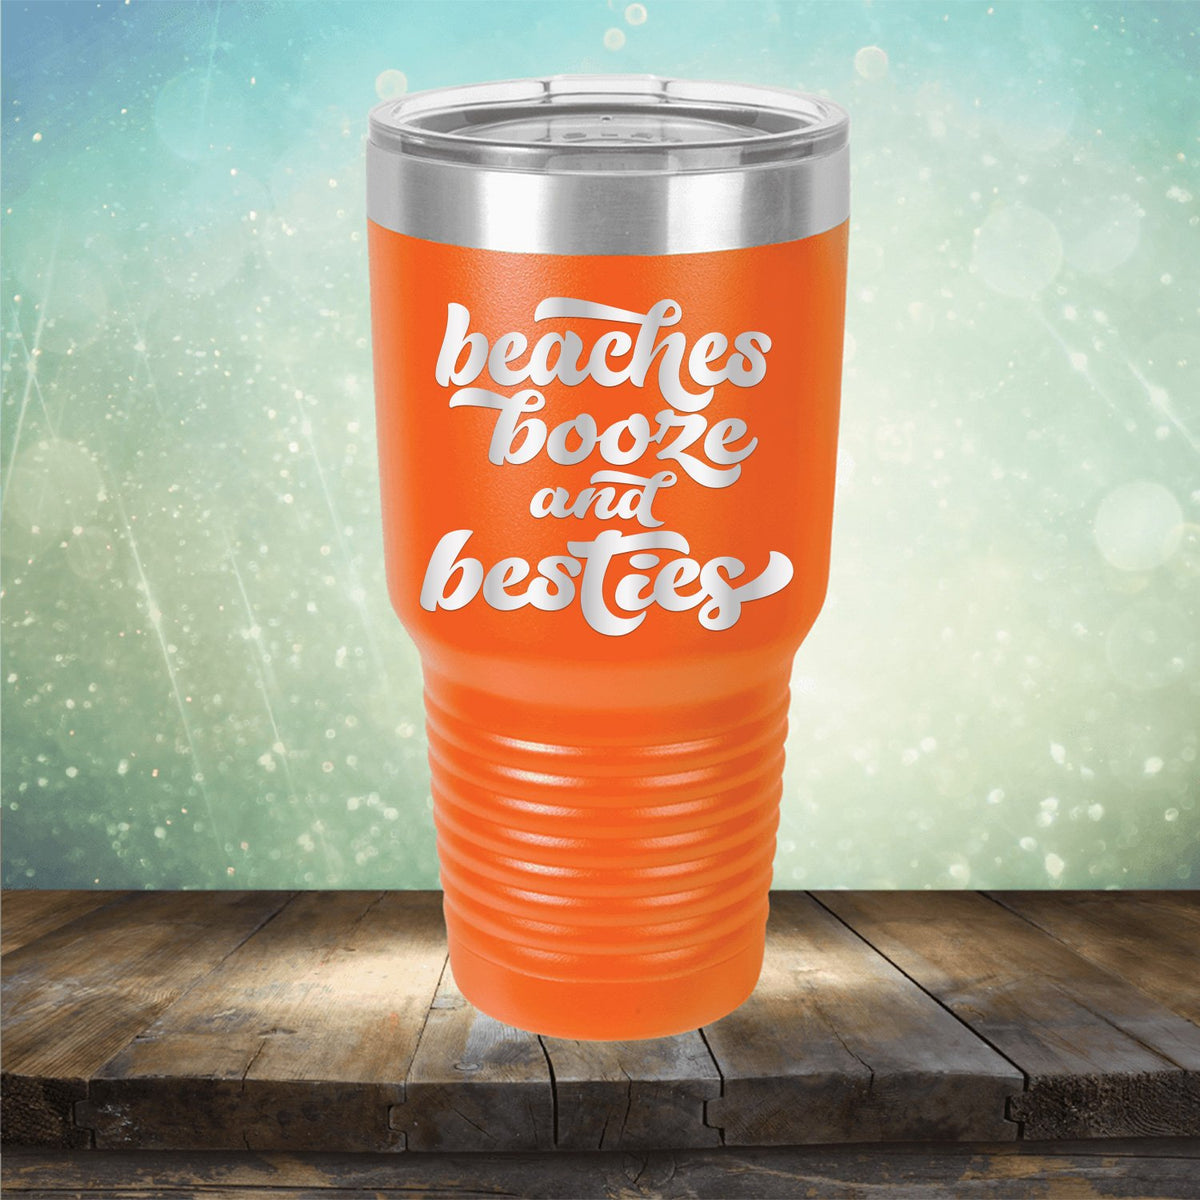 Beaches Booze and Besties - Laser Etched Tumbler Mug